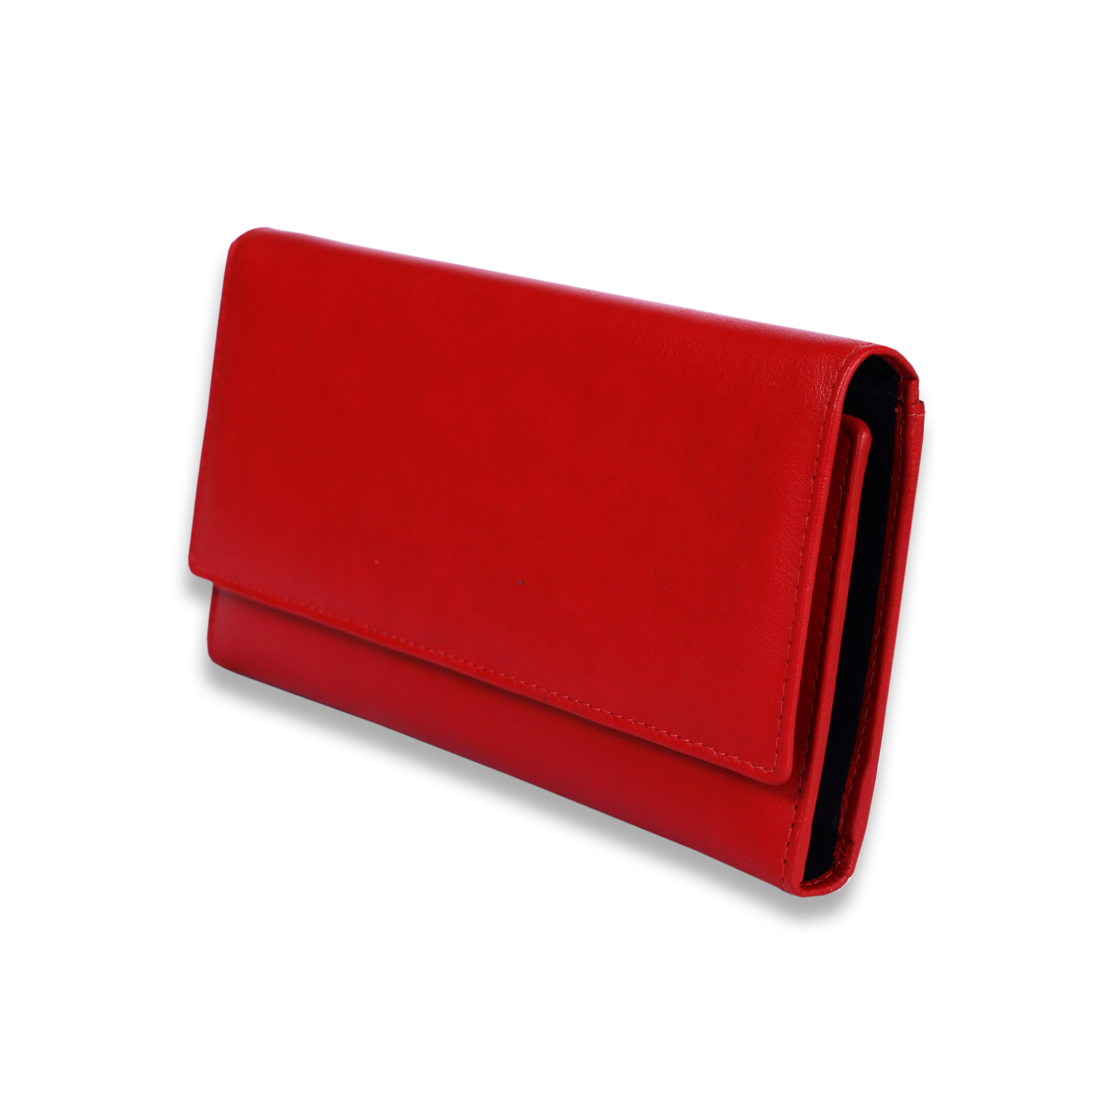 Leather Solid Red Women Wallet